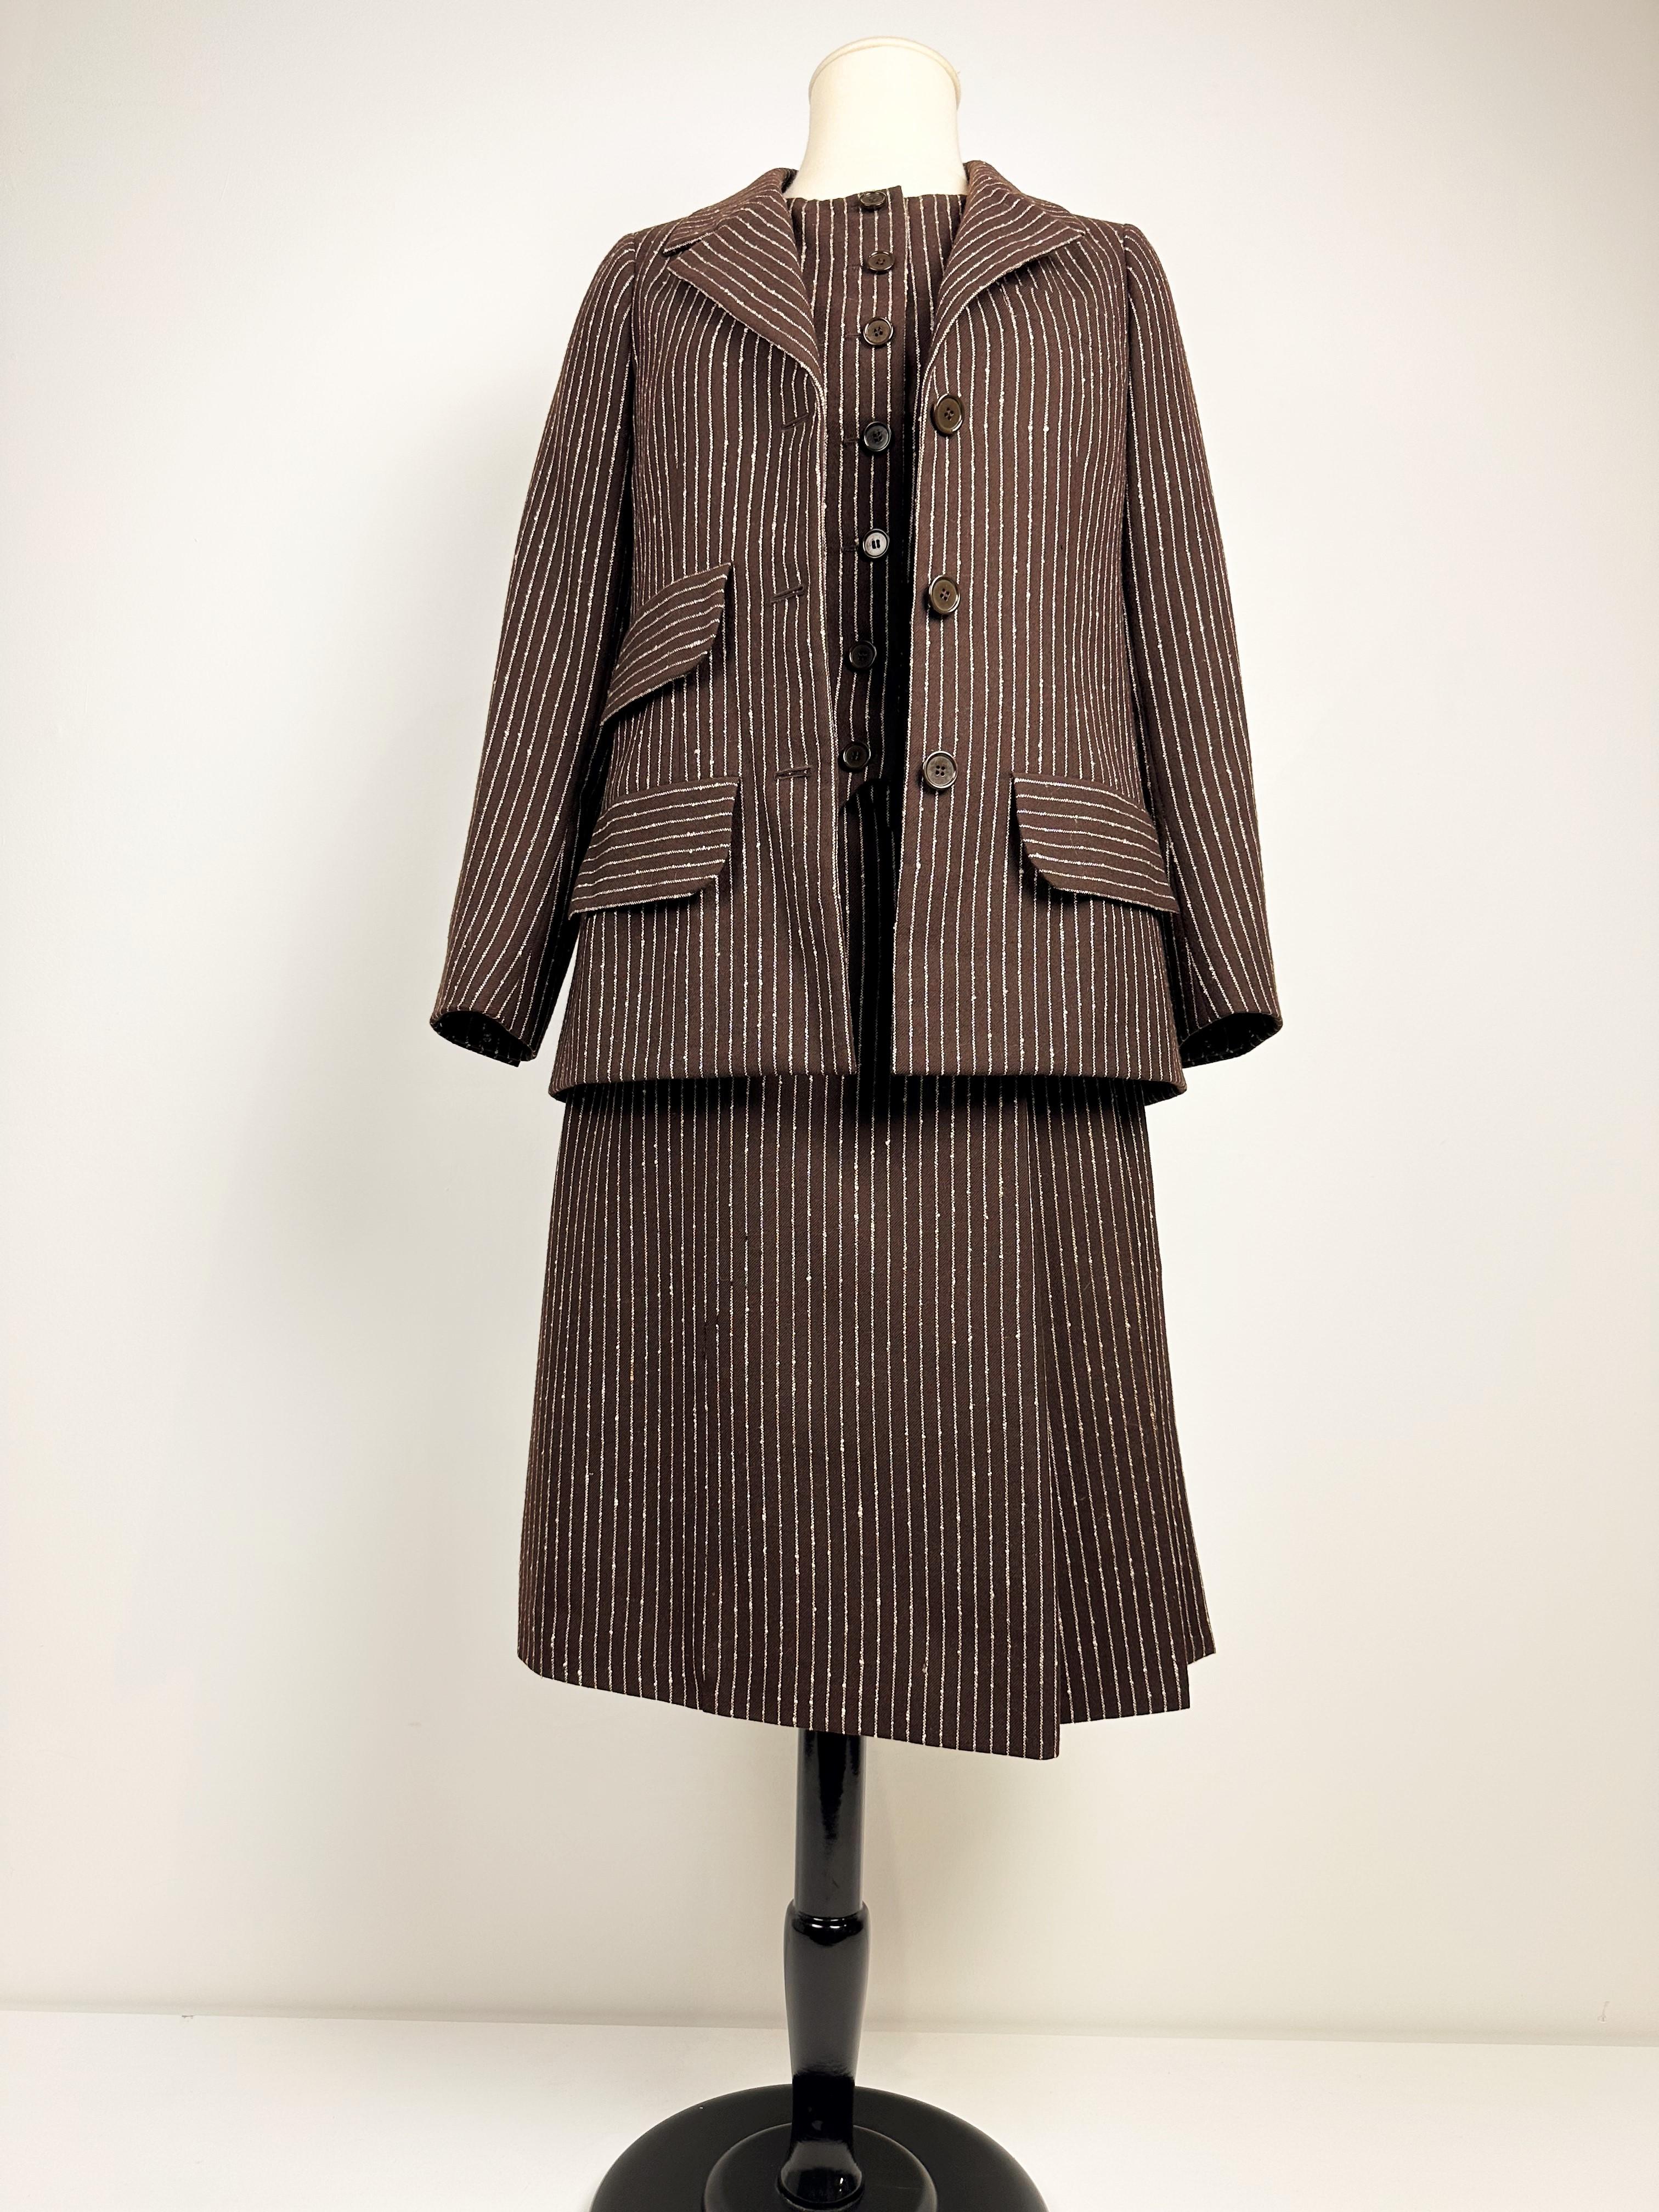 Yves Saint Laurent Haute Couture skirt-suit numbered 14539 Circa 1967/1970 For Sale 14